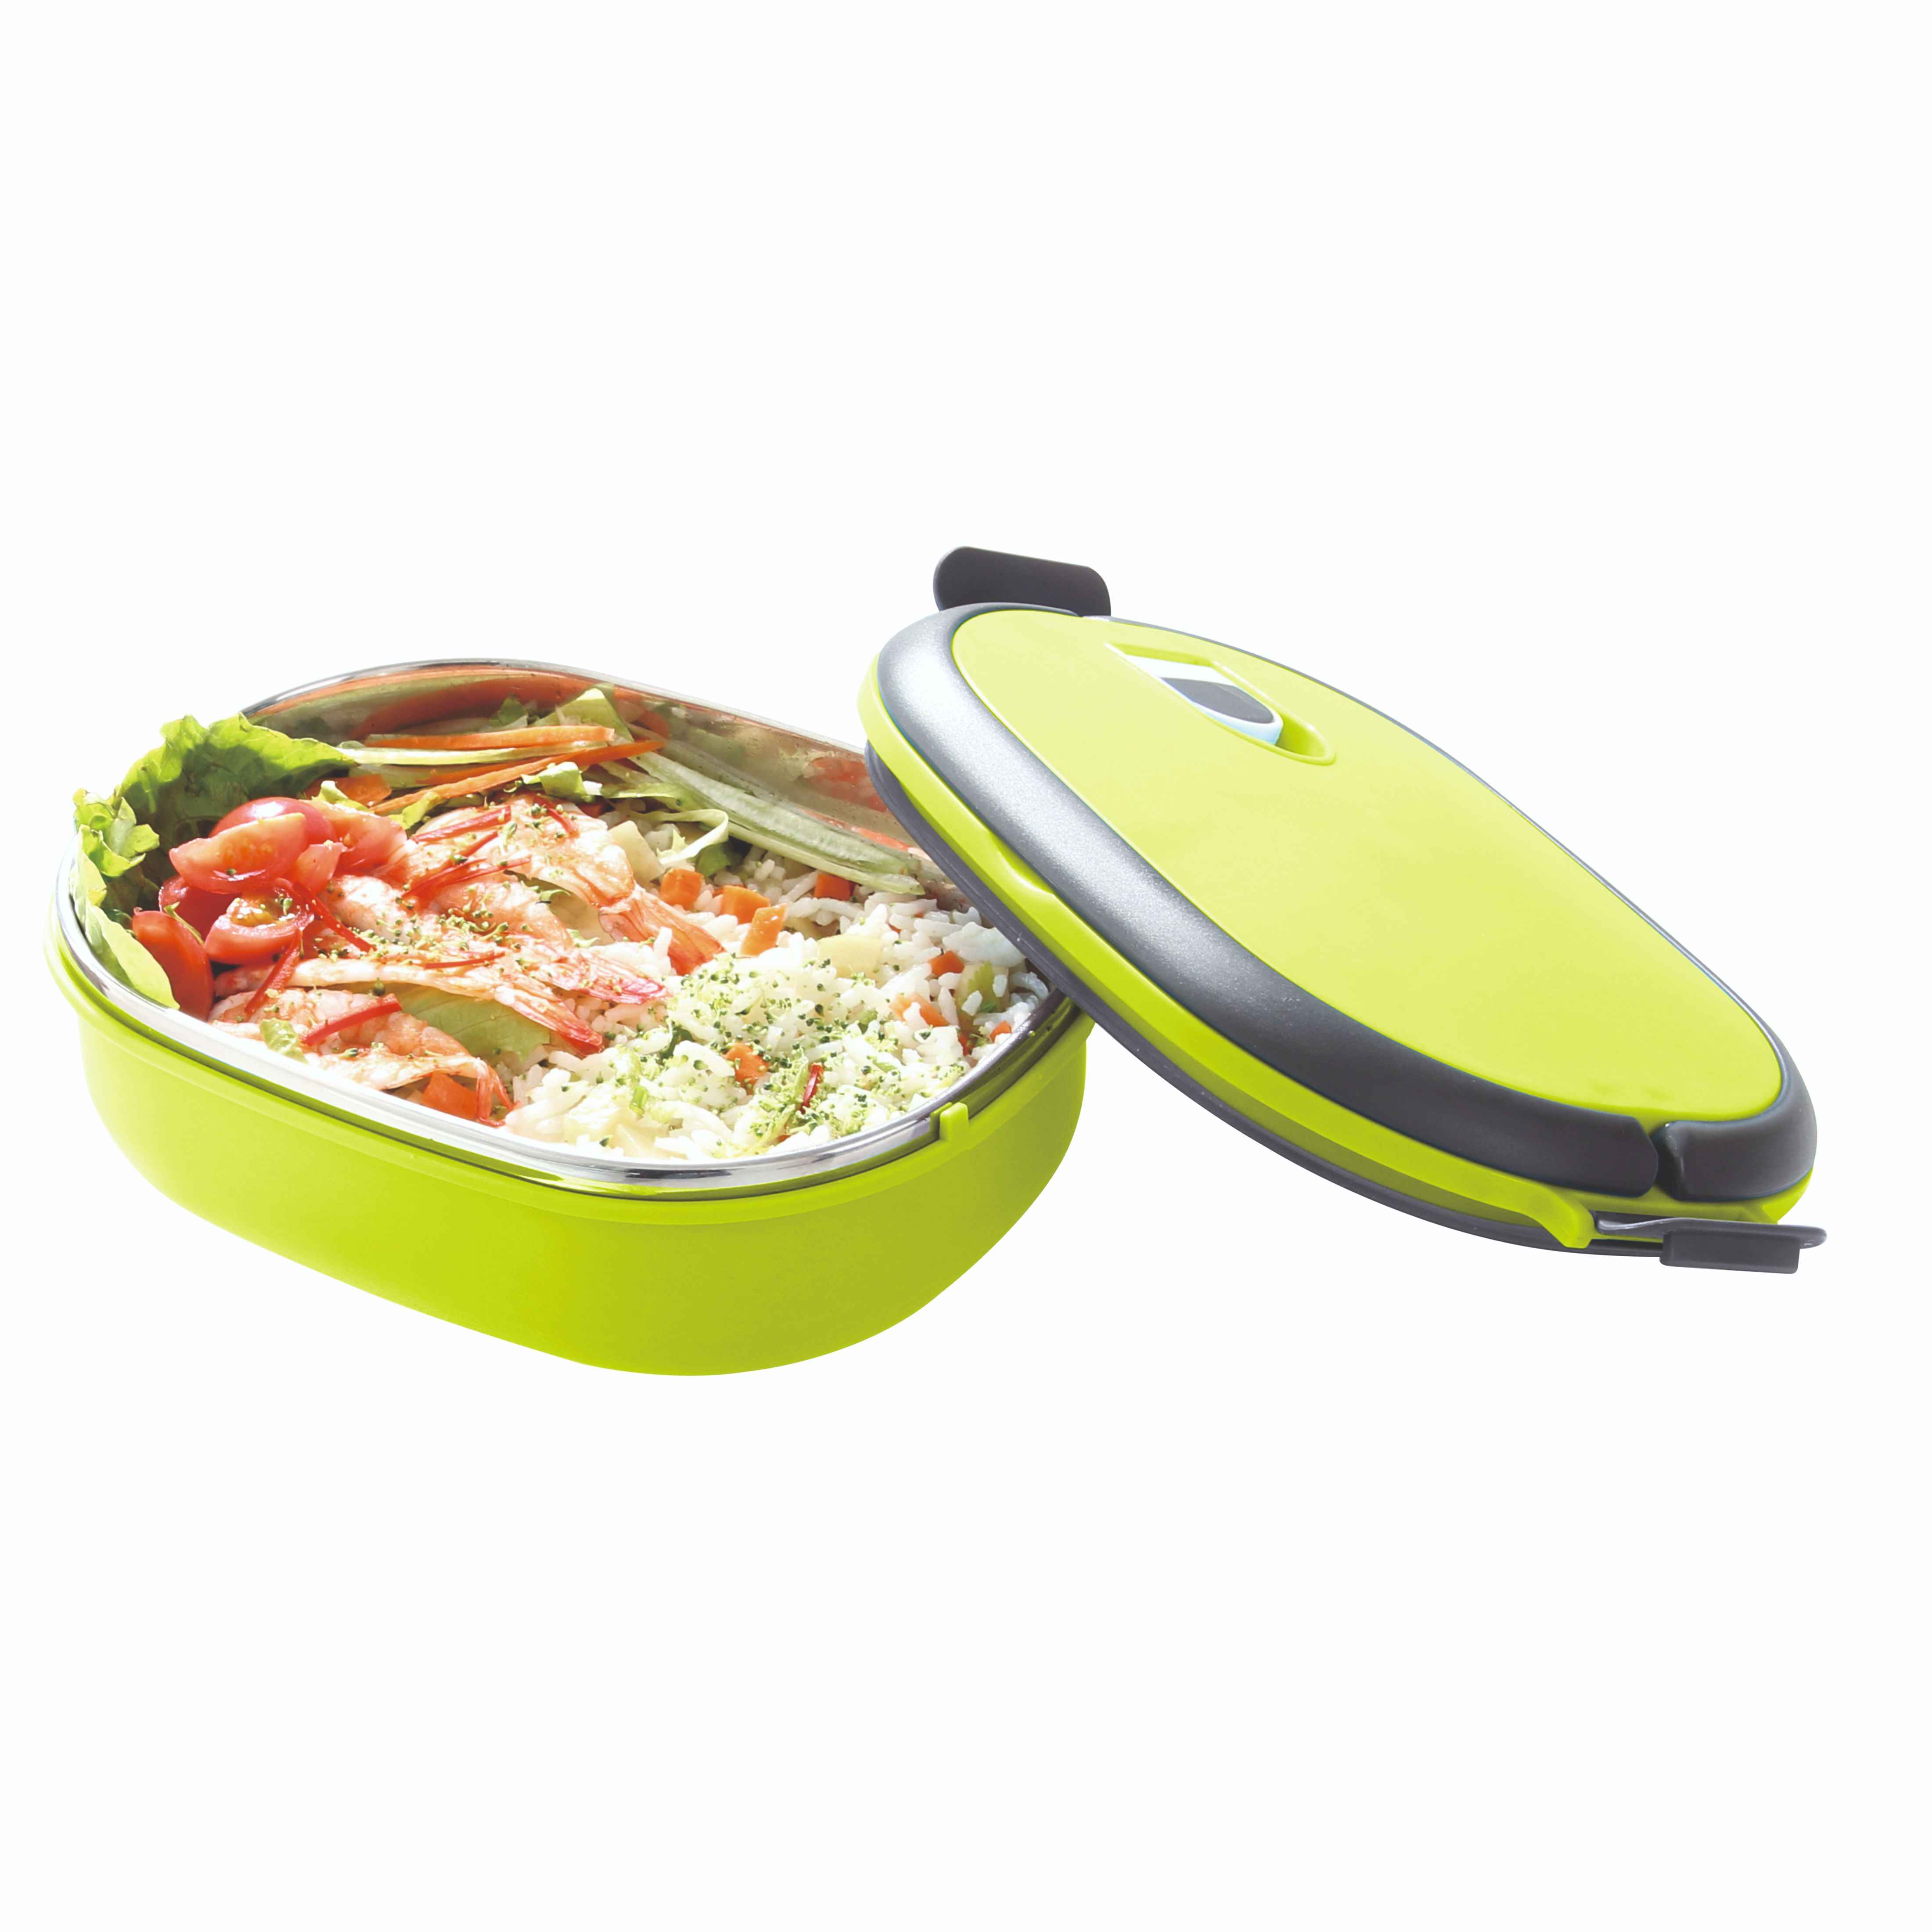 Royalford Lunch Box - Thermal Lunch Box Bento Lunch Box With Stainless Steel Thermal Insulation - Green